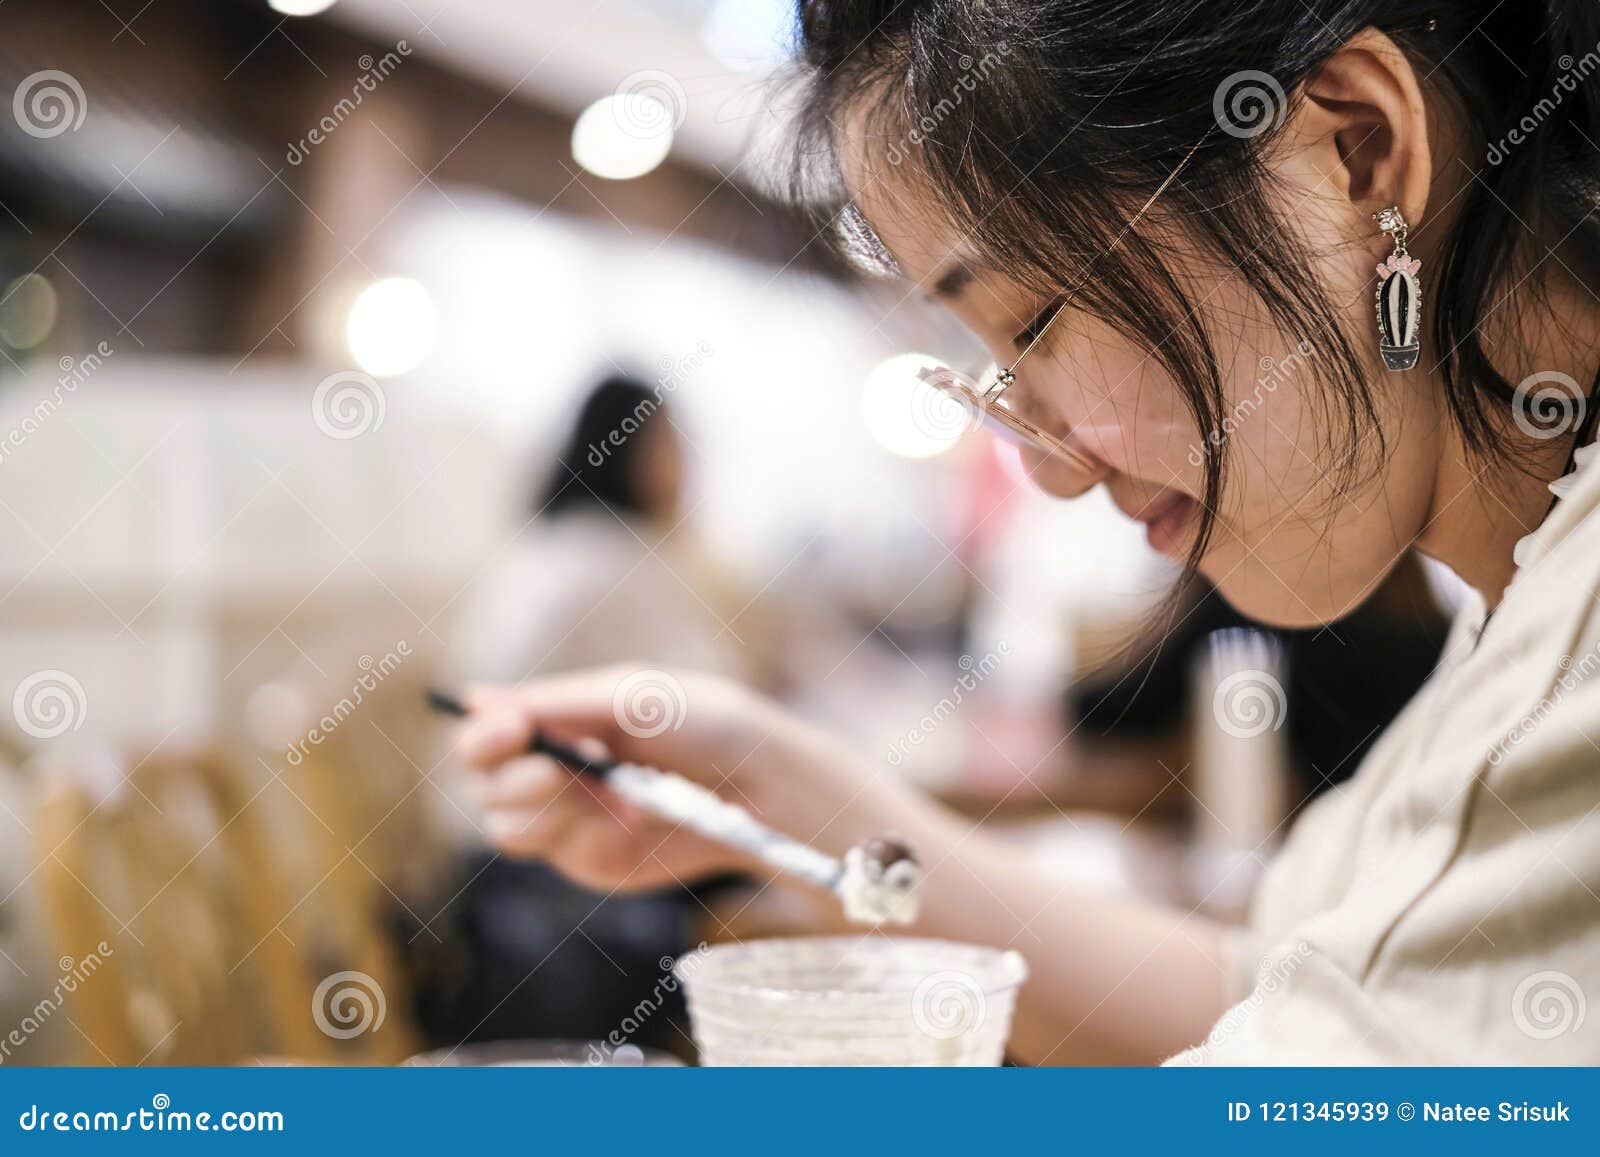 asian cute woman drinking chocolate frappe in cafe shop